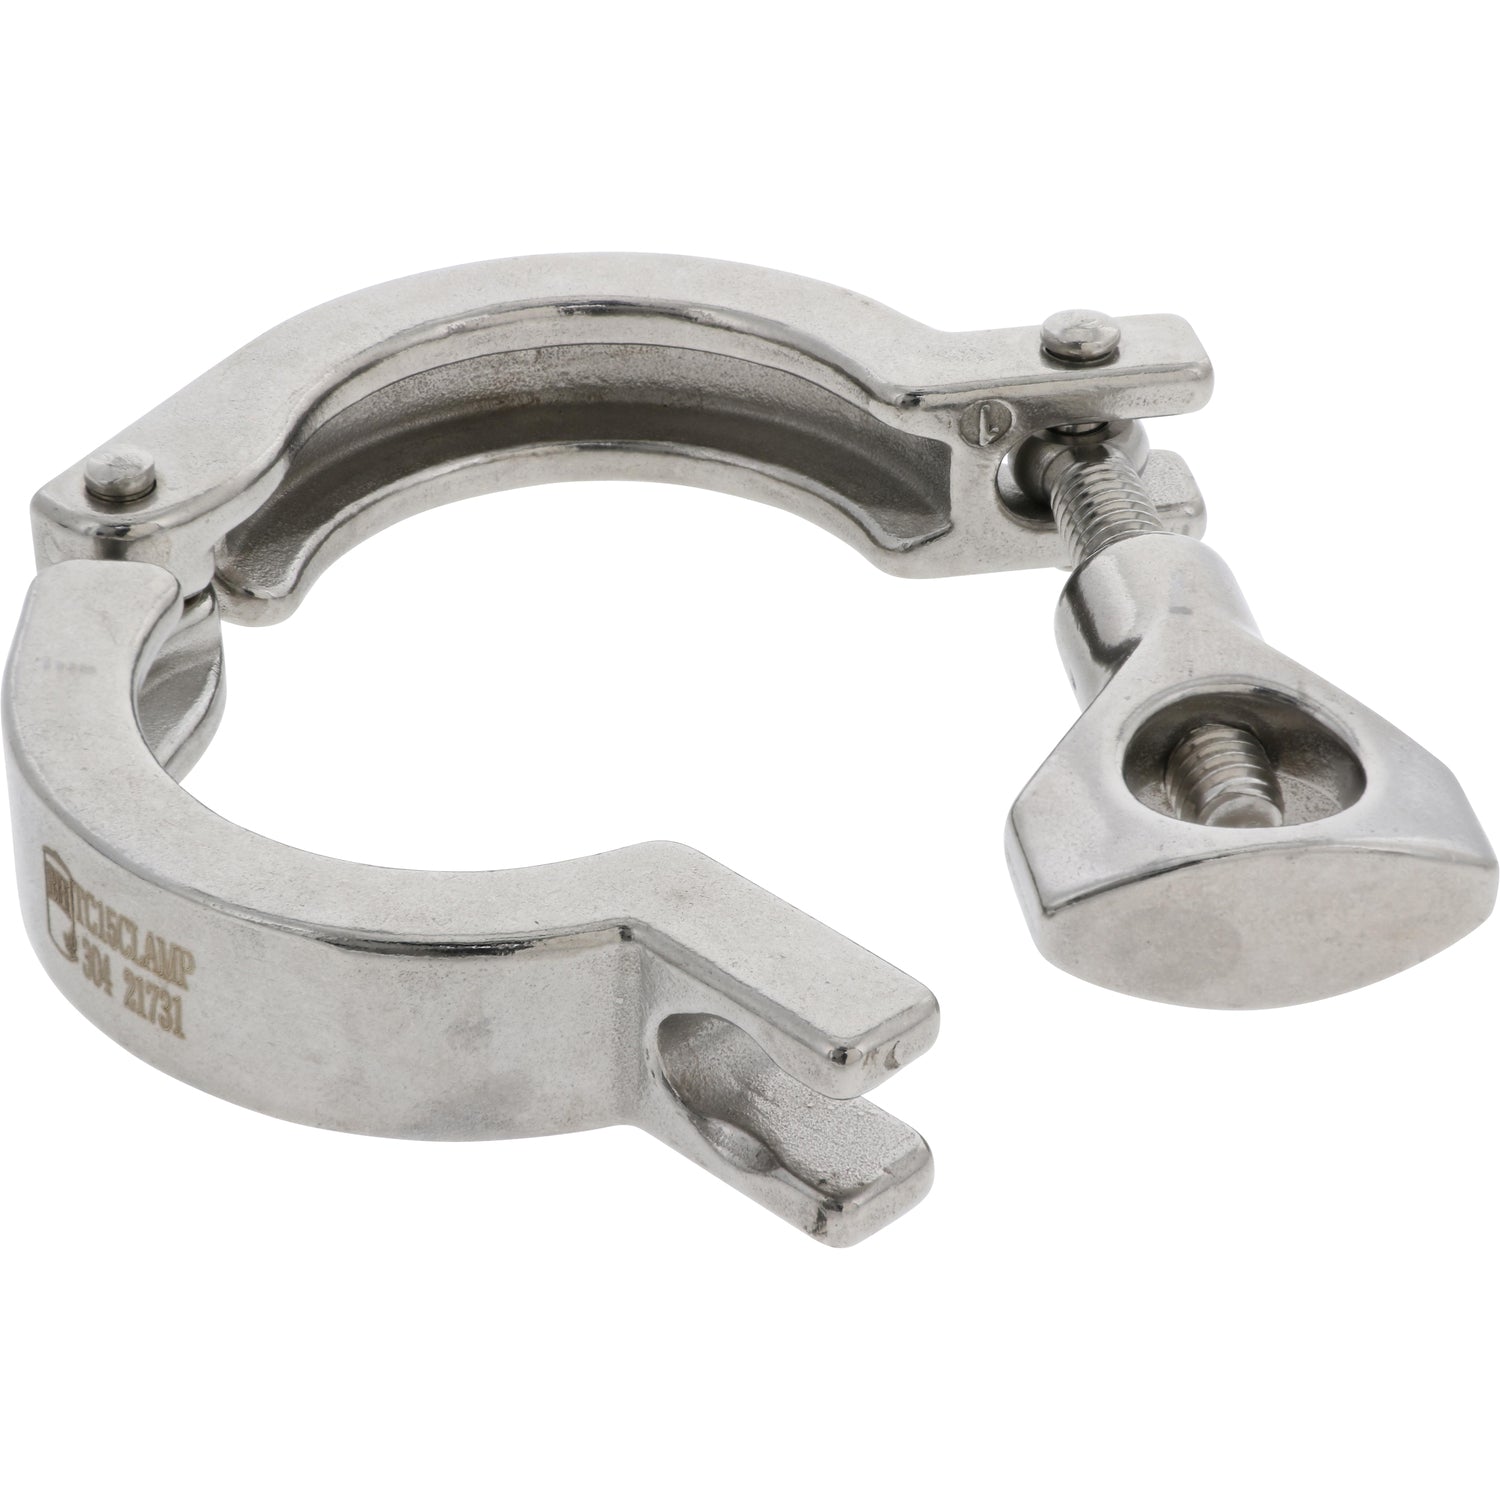 Open stainless steel 1.5" tri-clamp on white background. 